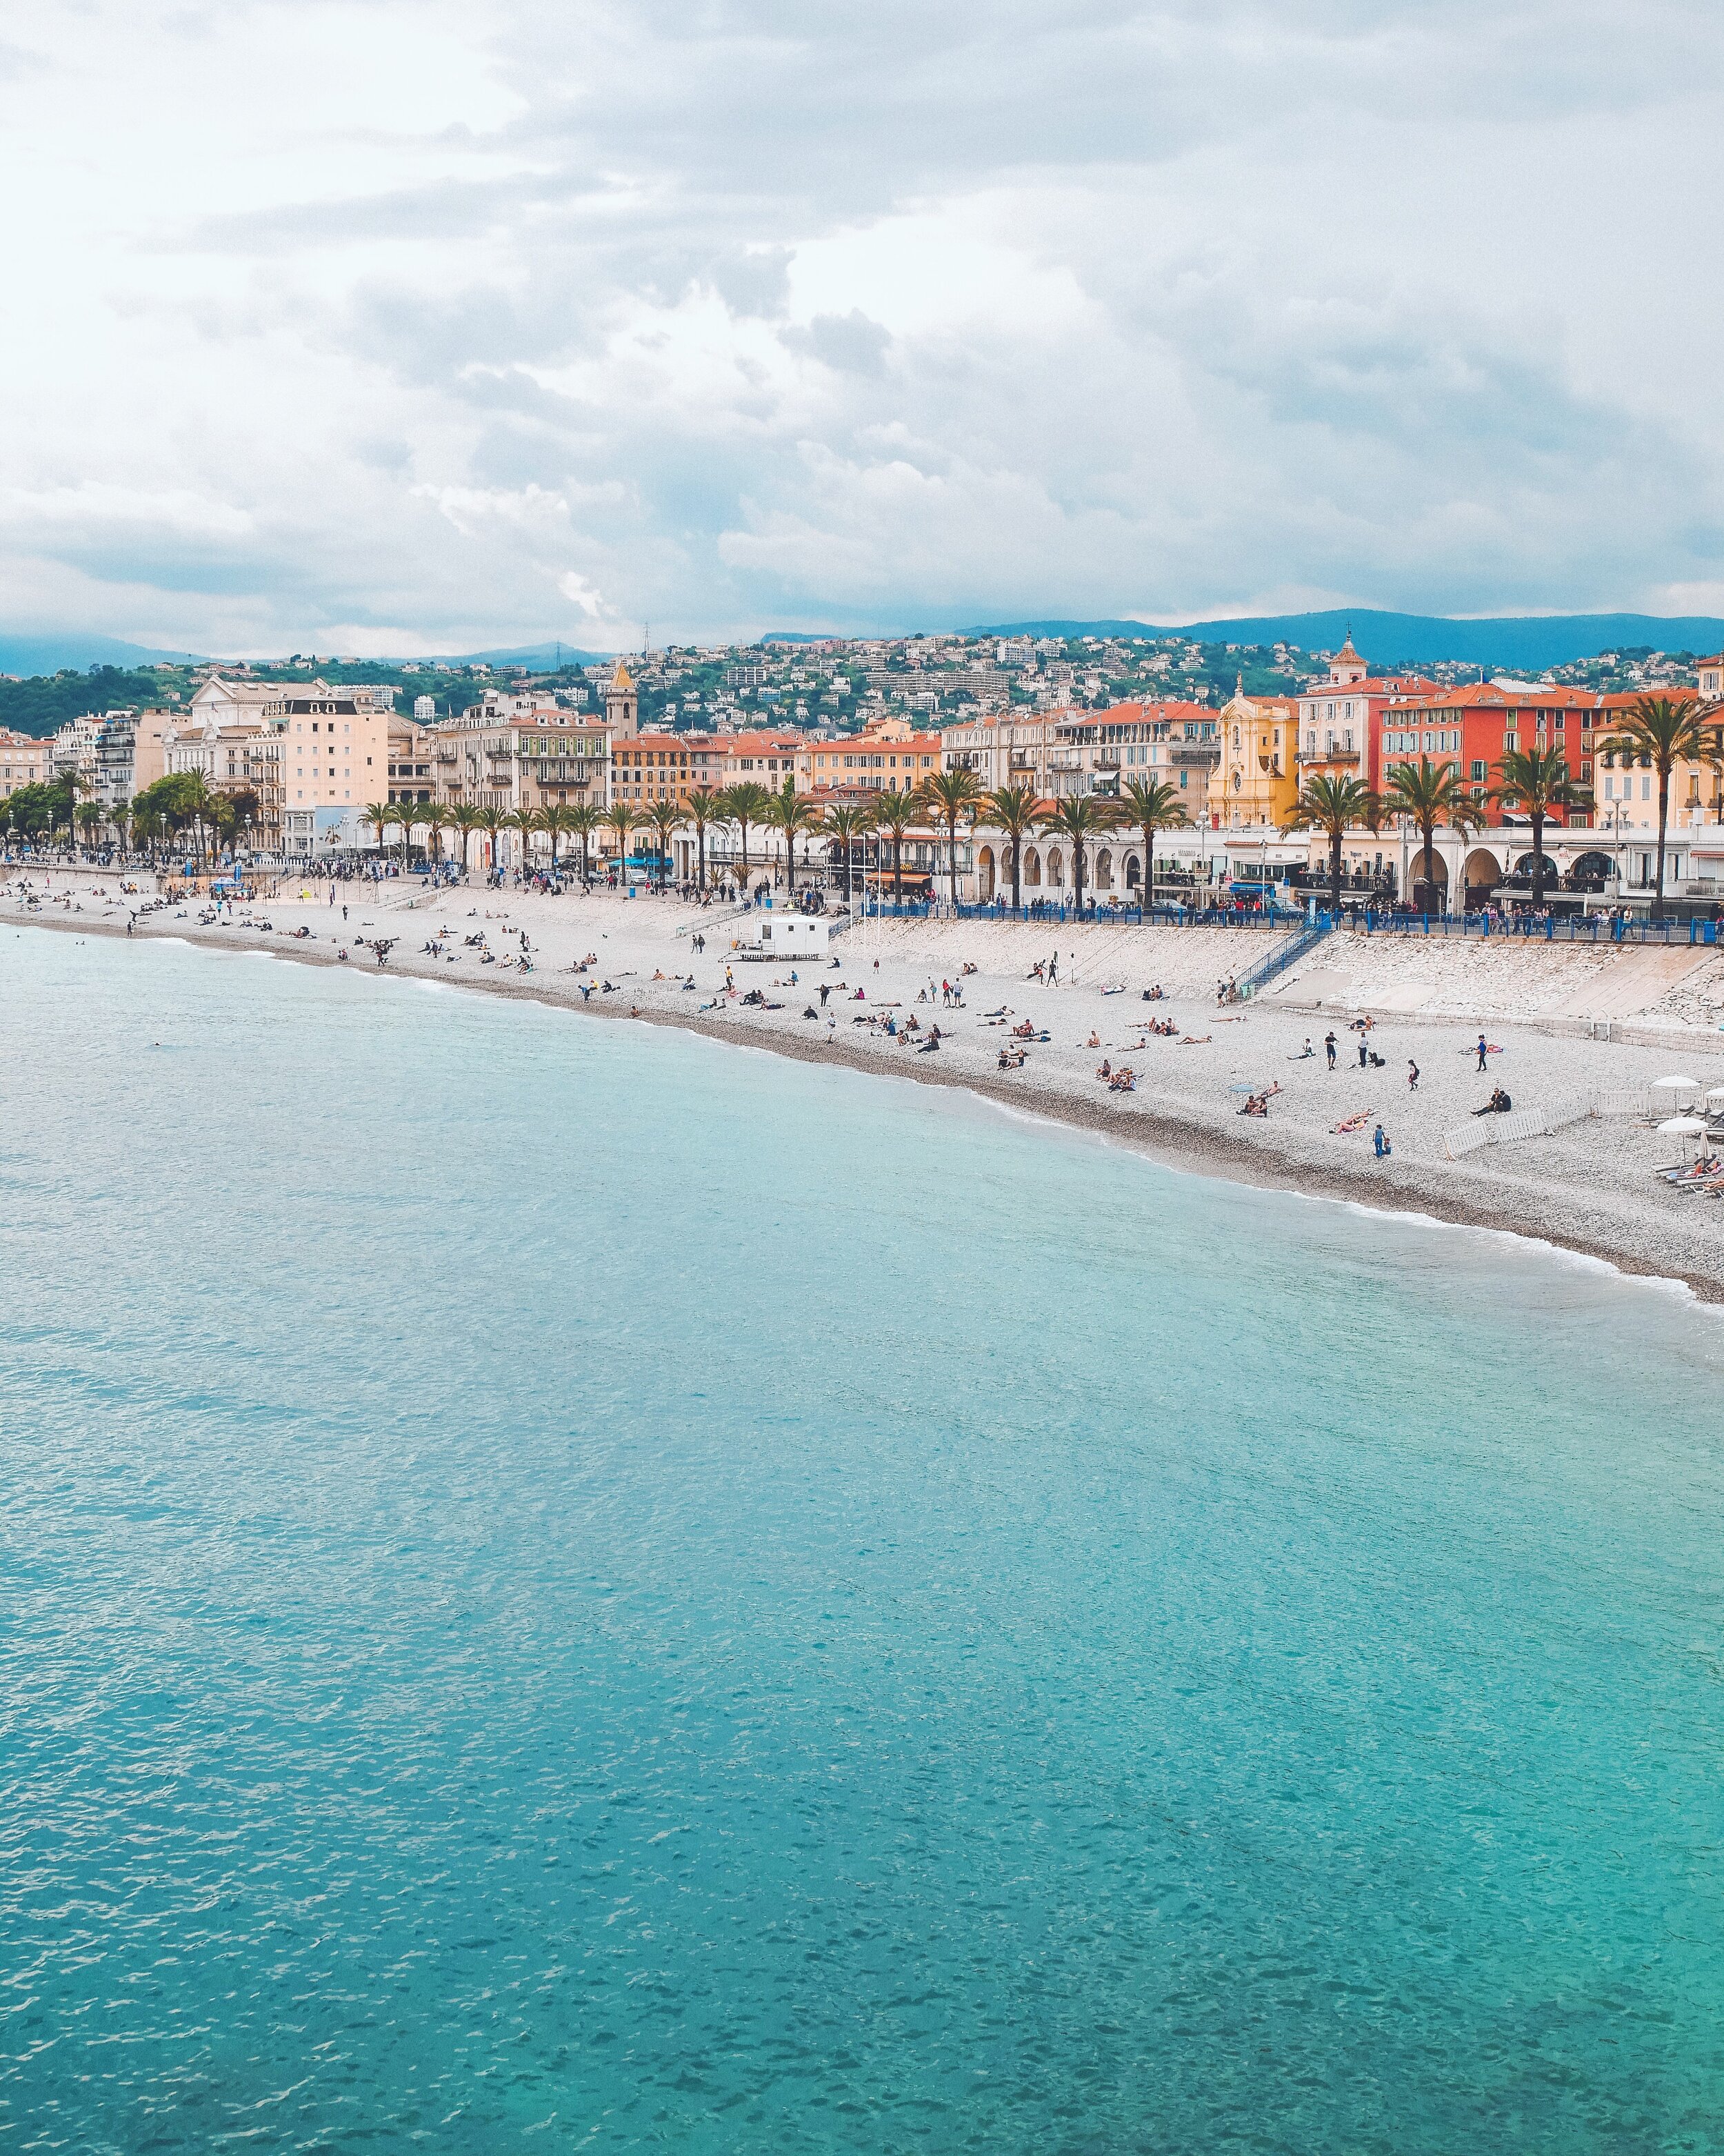 View on the main beach - Promenade des anglais - I Love Nice Sign - French Riviera - France